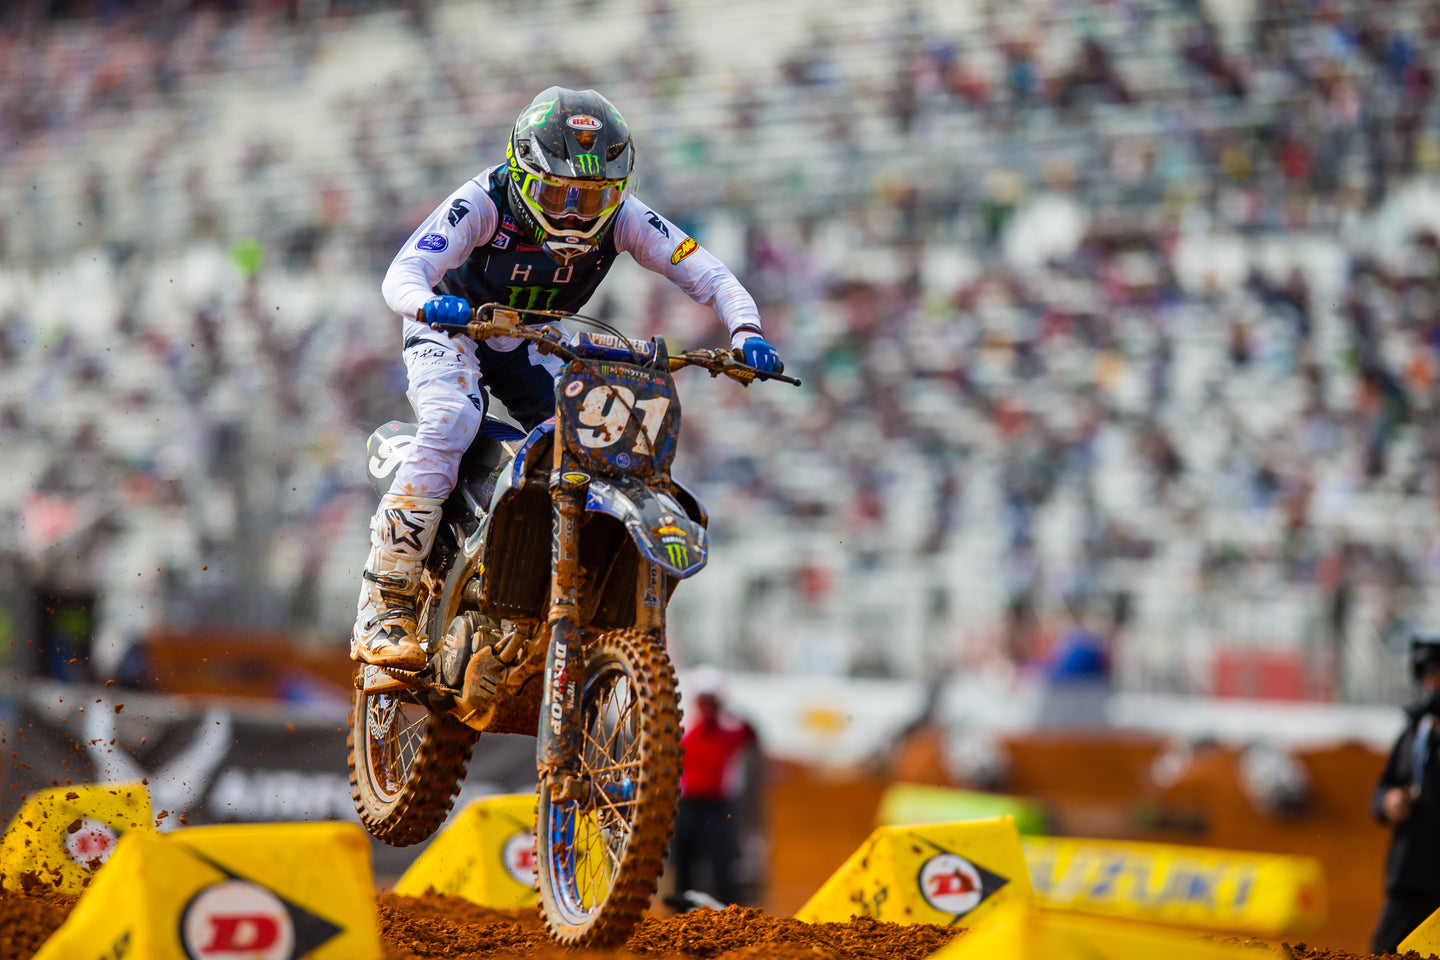 NATE THRASHER STORMS TO DOMINANT 250SX WEST RACE VICTORY AT ATLANTA 1, JUSTIN COOPER SECOND